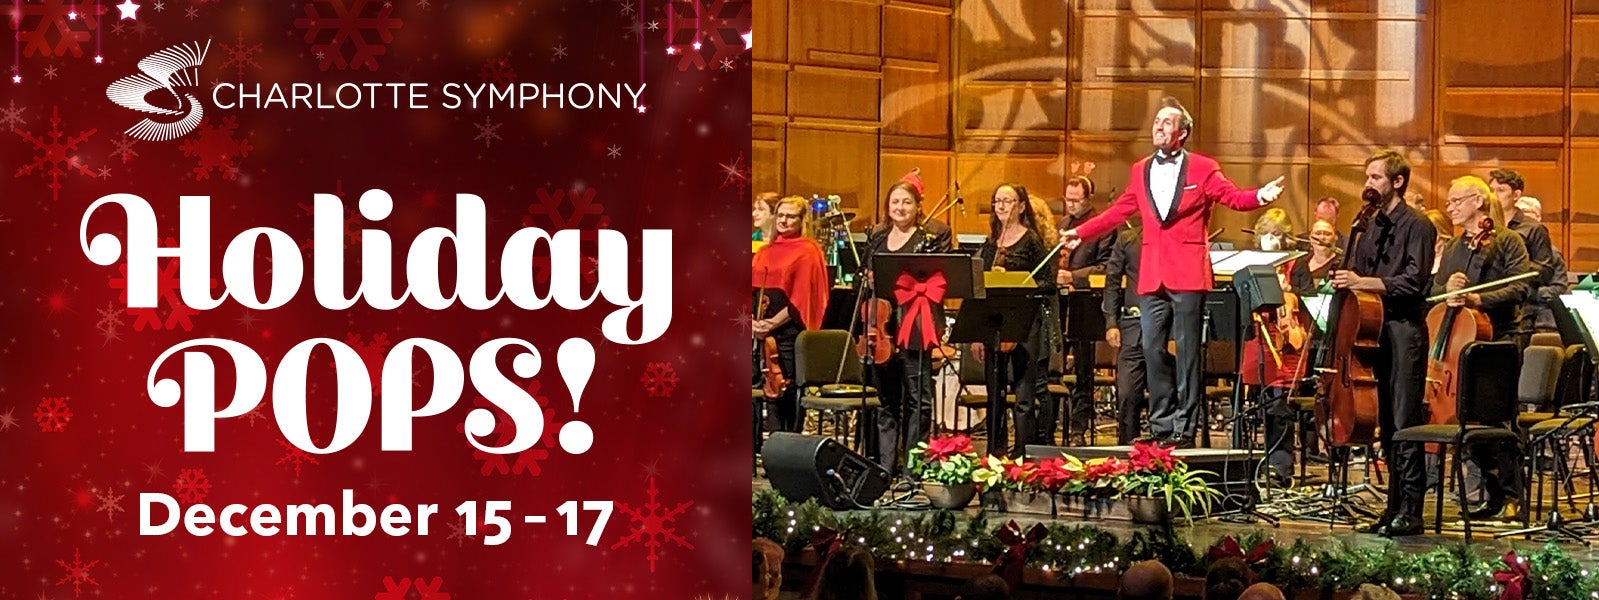 Charlotte Symphony Holiday Pops Blumenthal Performing Arts